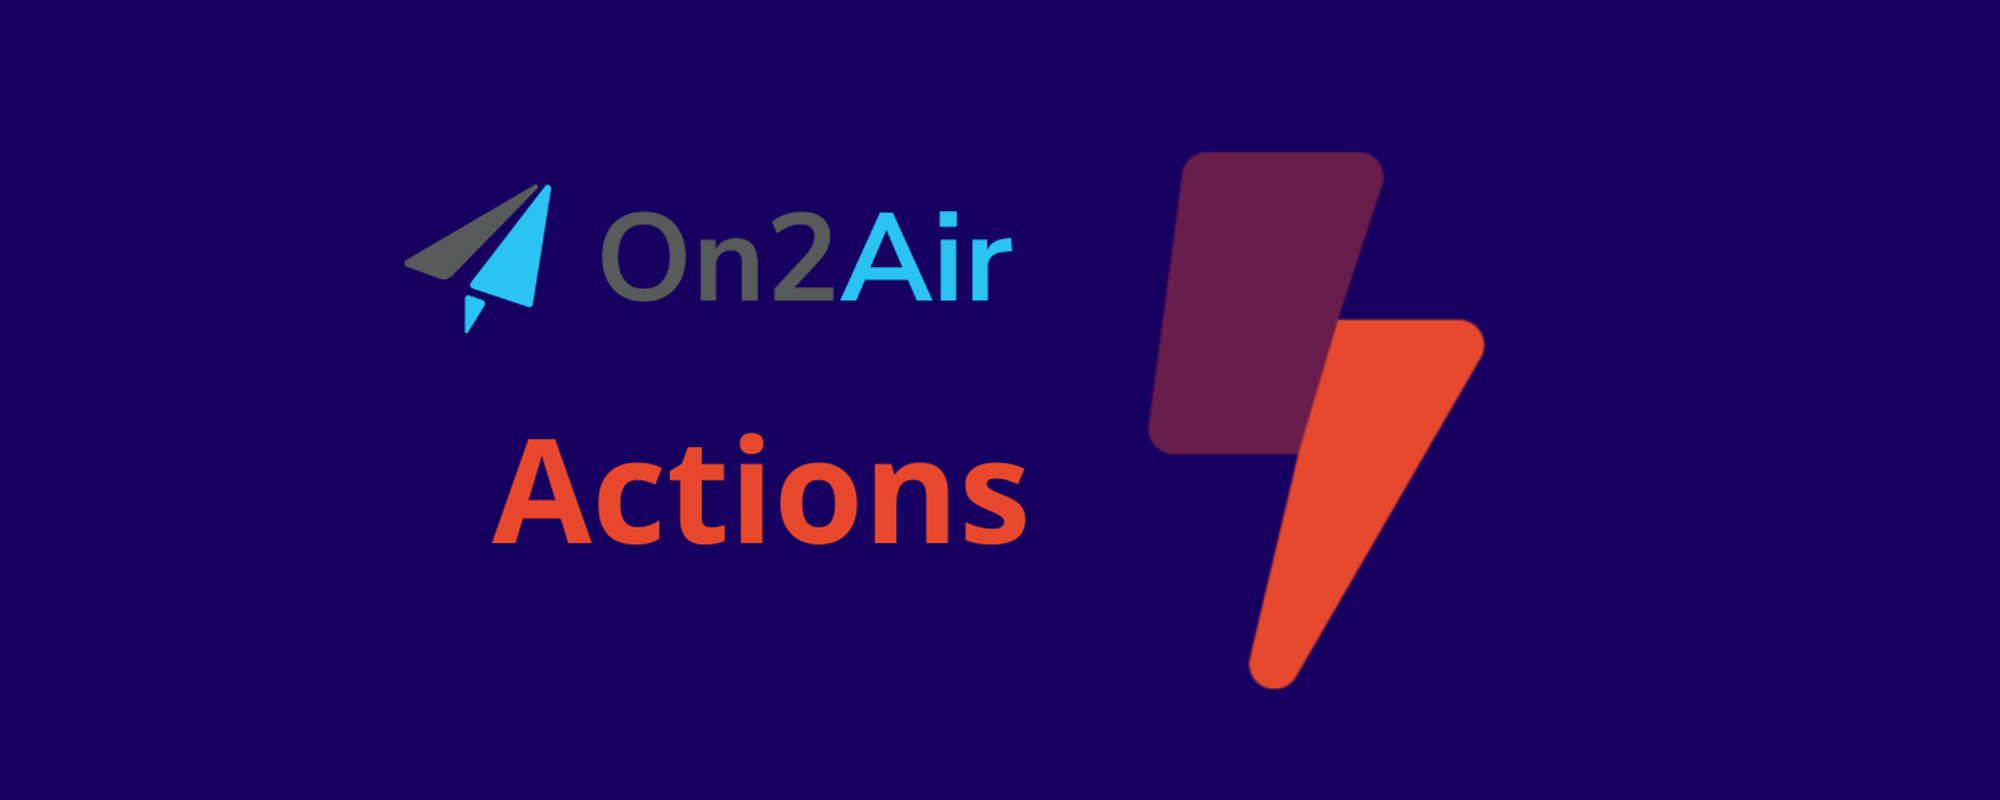 On2Air Actions